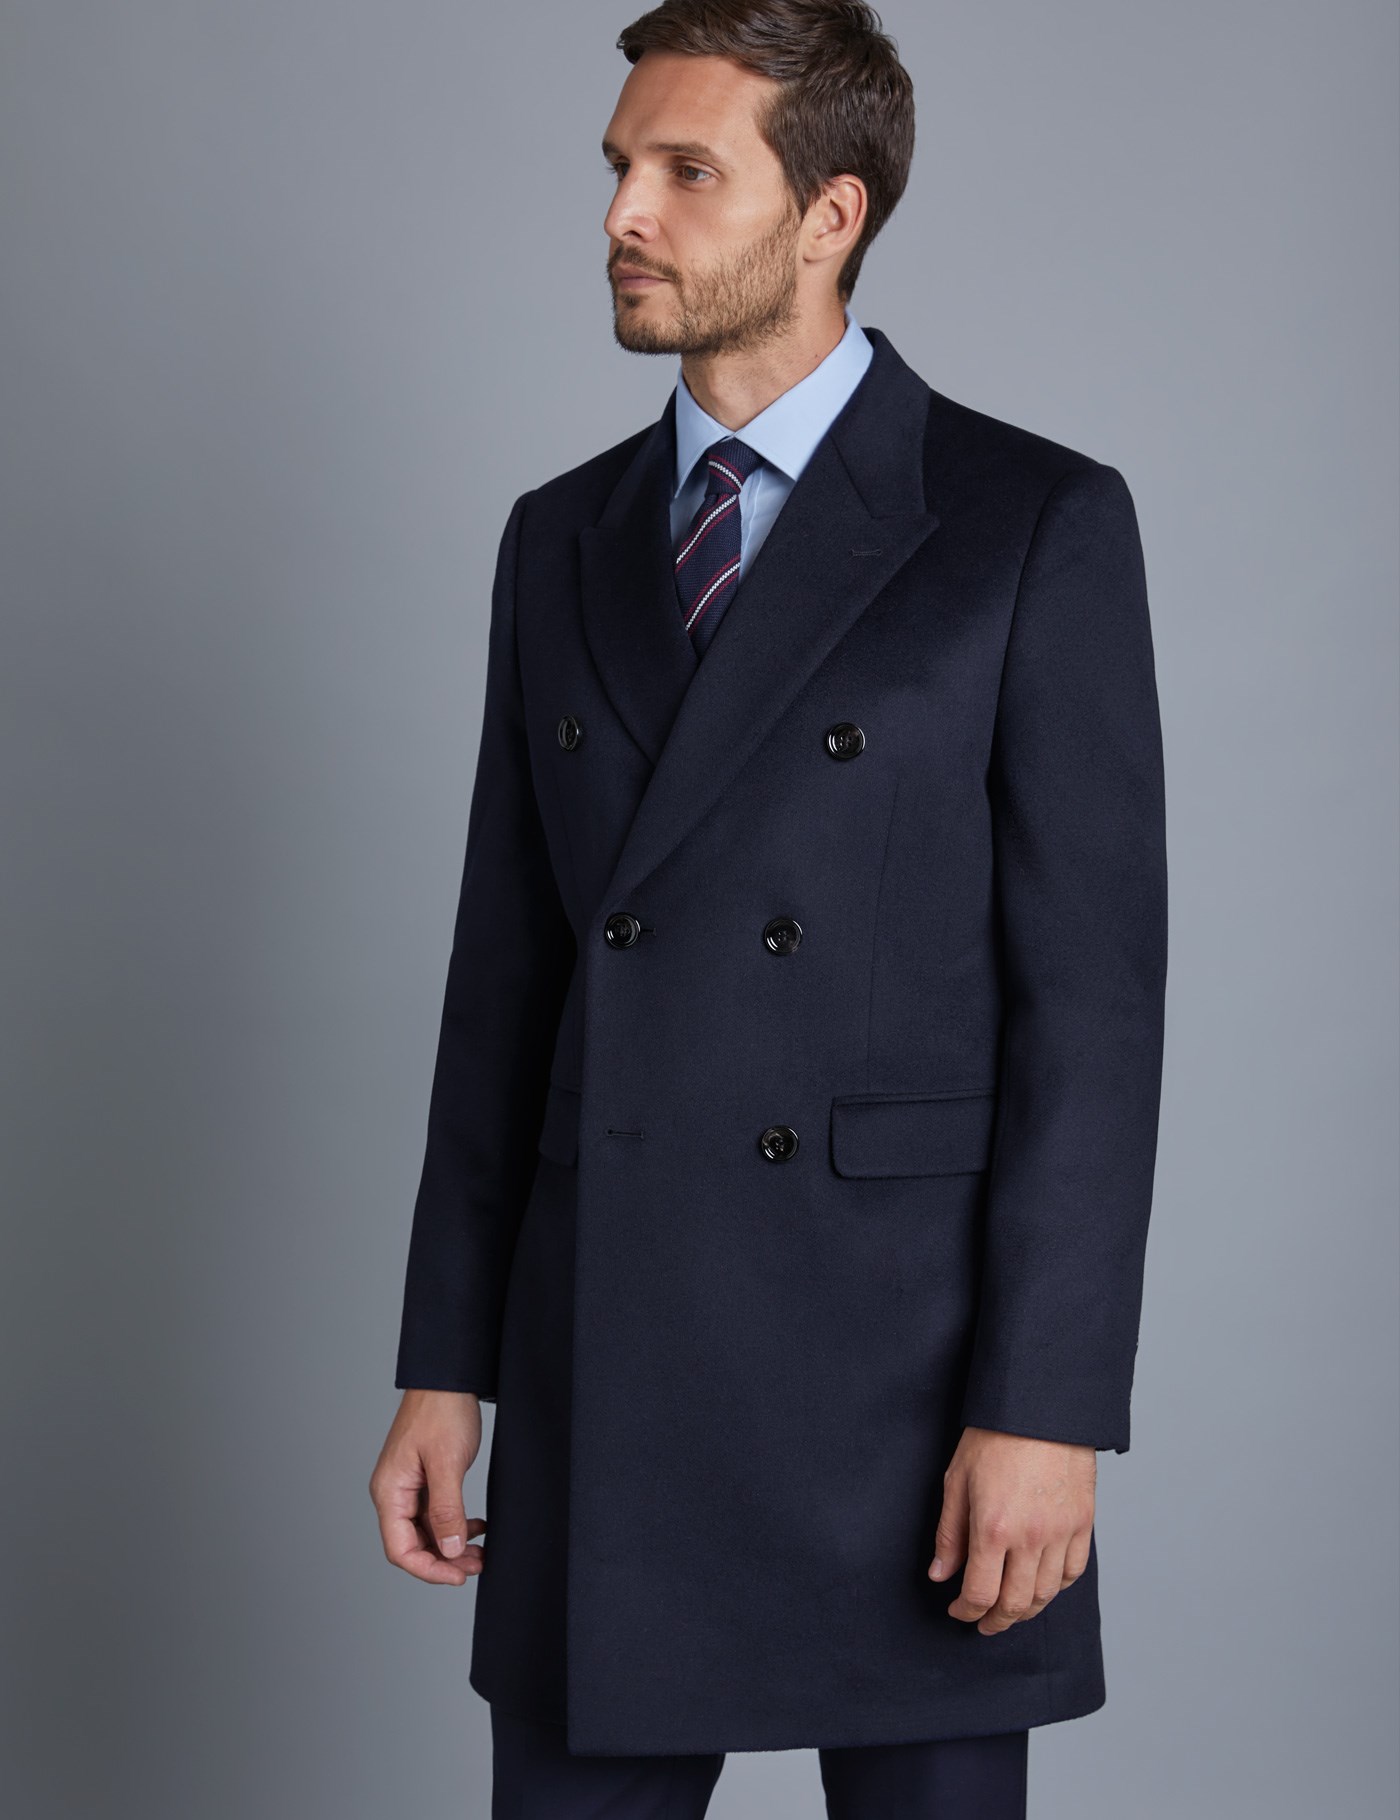 Men’s Double Breasted Navy Wool Cashmere Overcoat | Hawes & Curtis